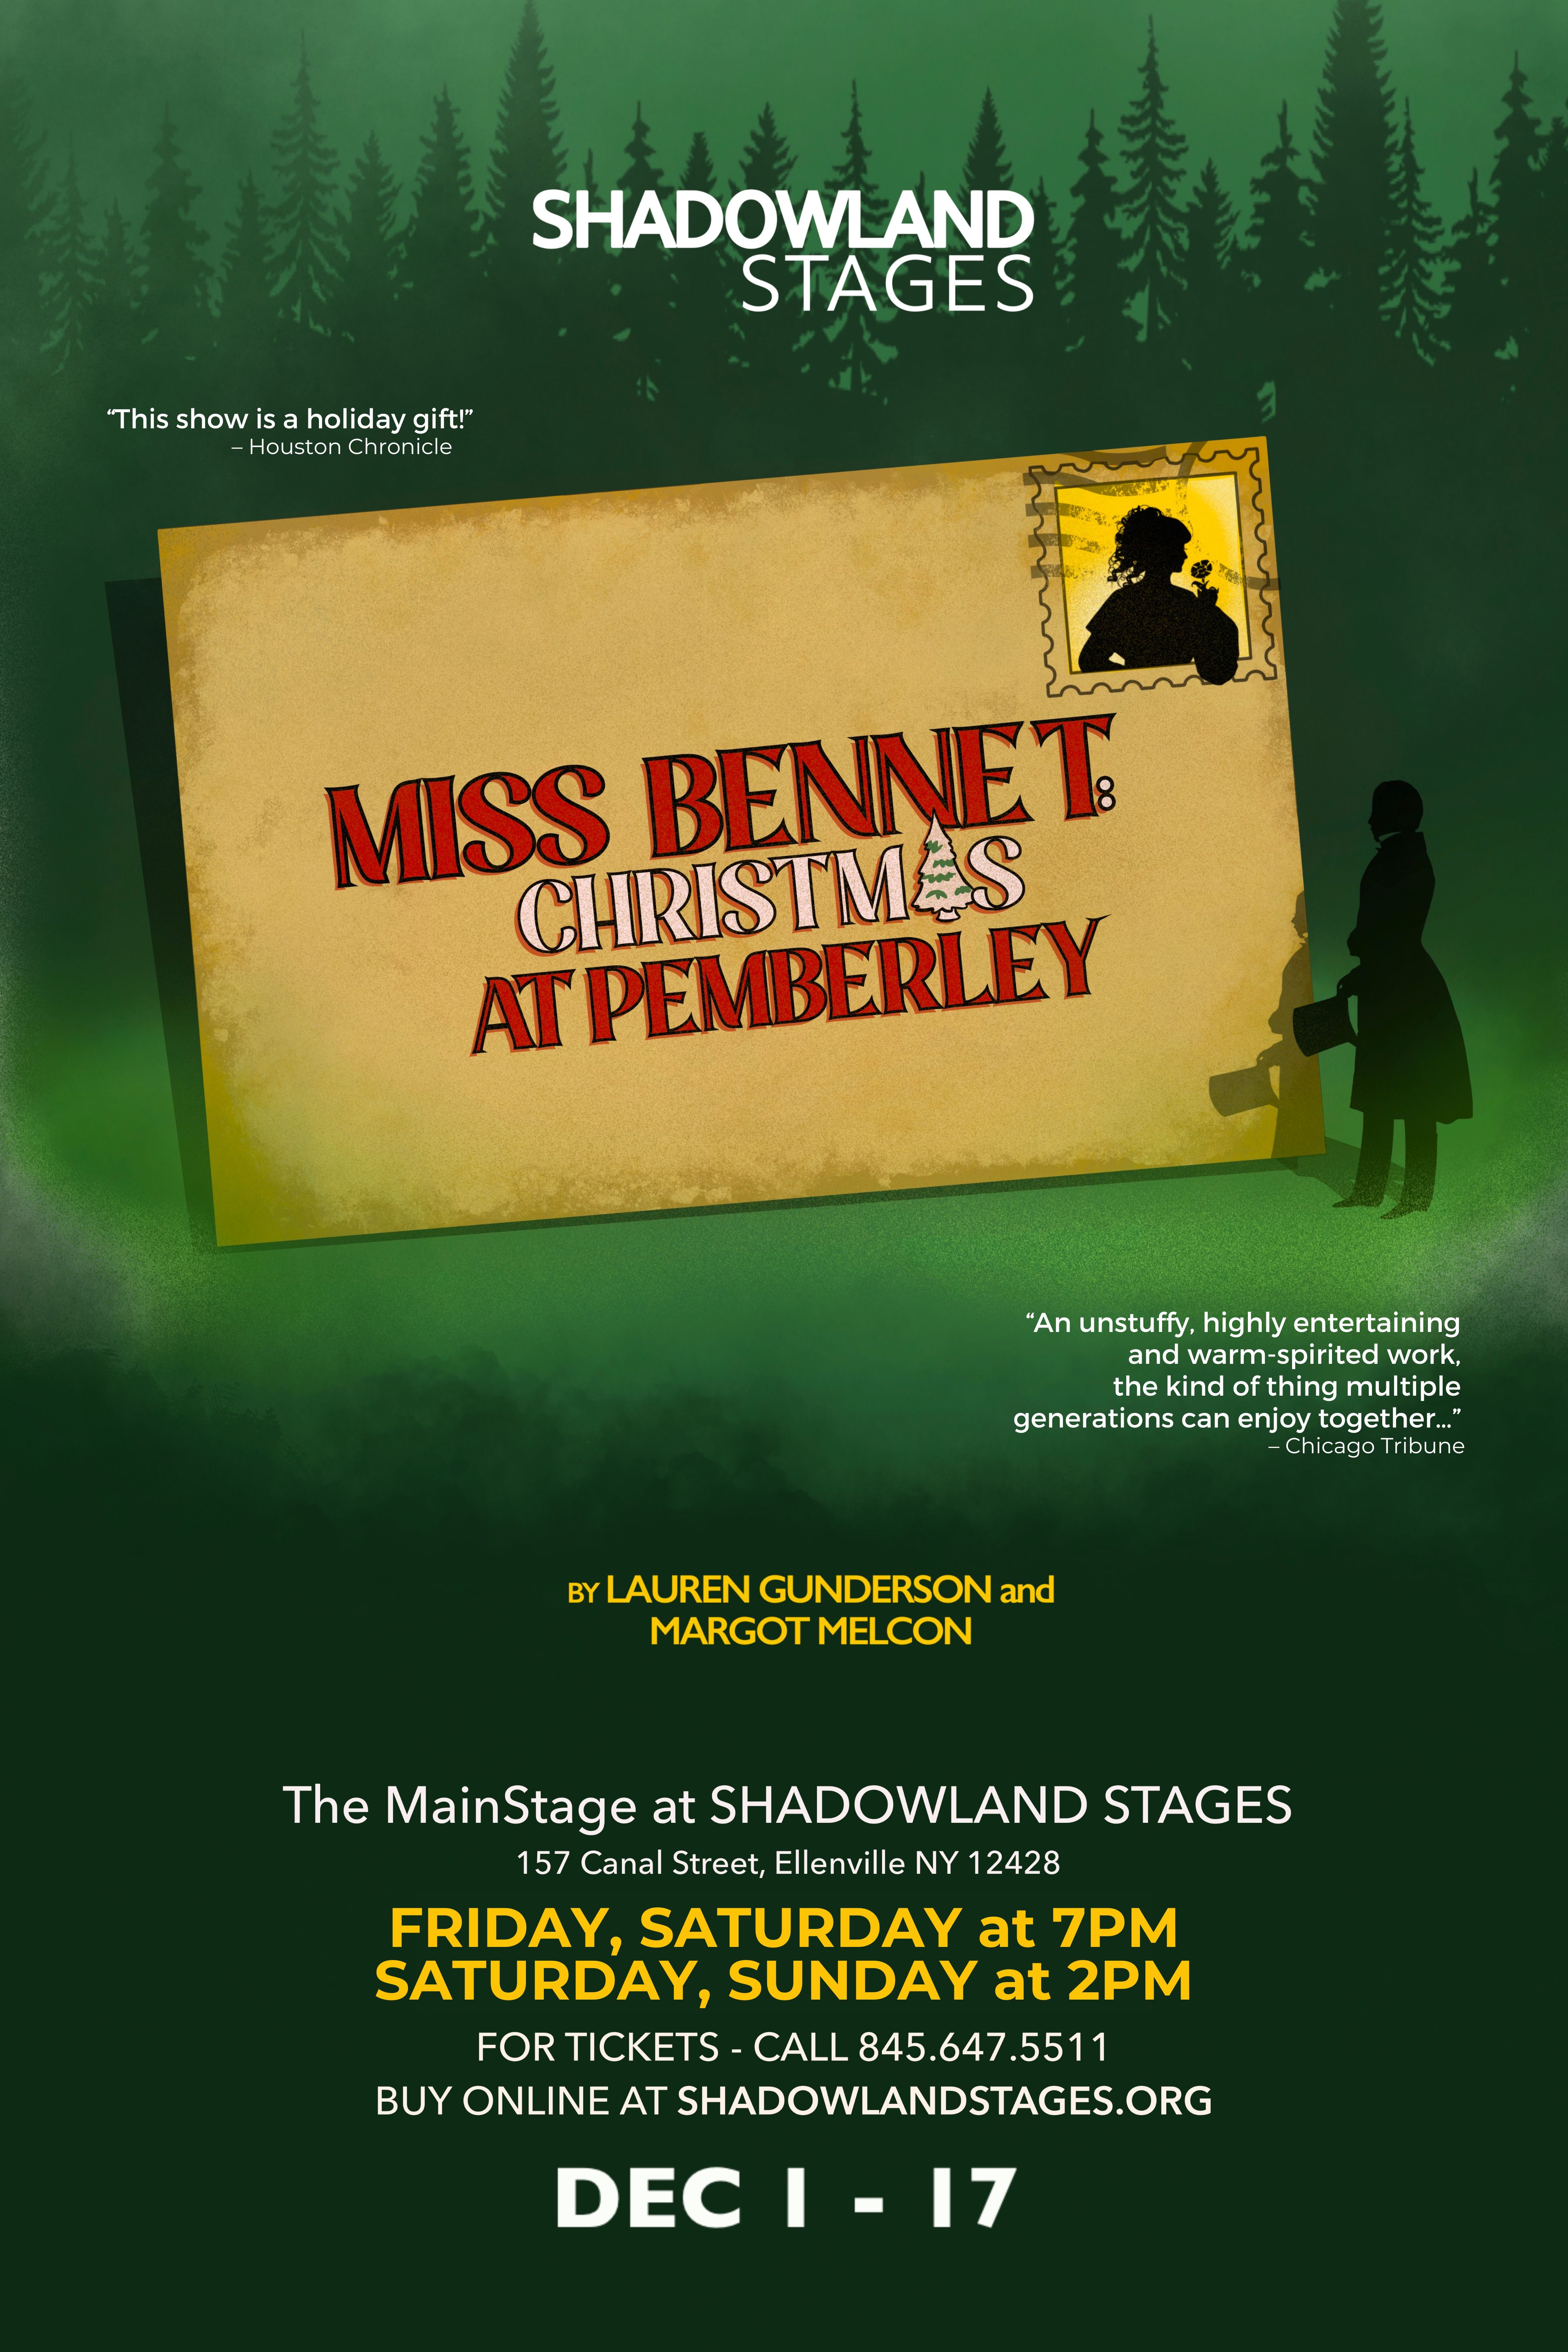 SHADOWLAND STAGES Presents "Miss Bennet: Christmas at Pemberley" – a Holiday Classic